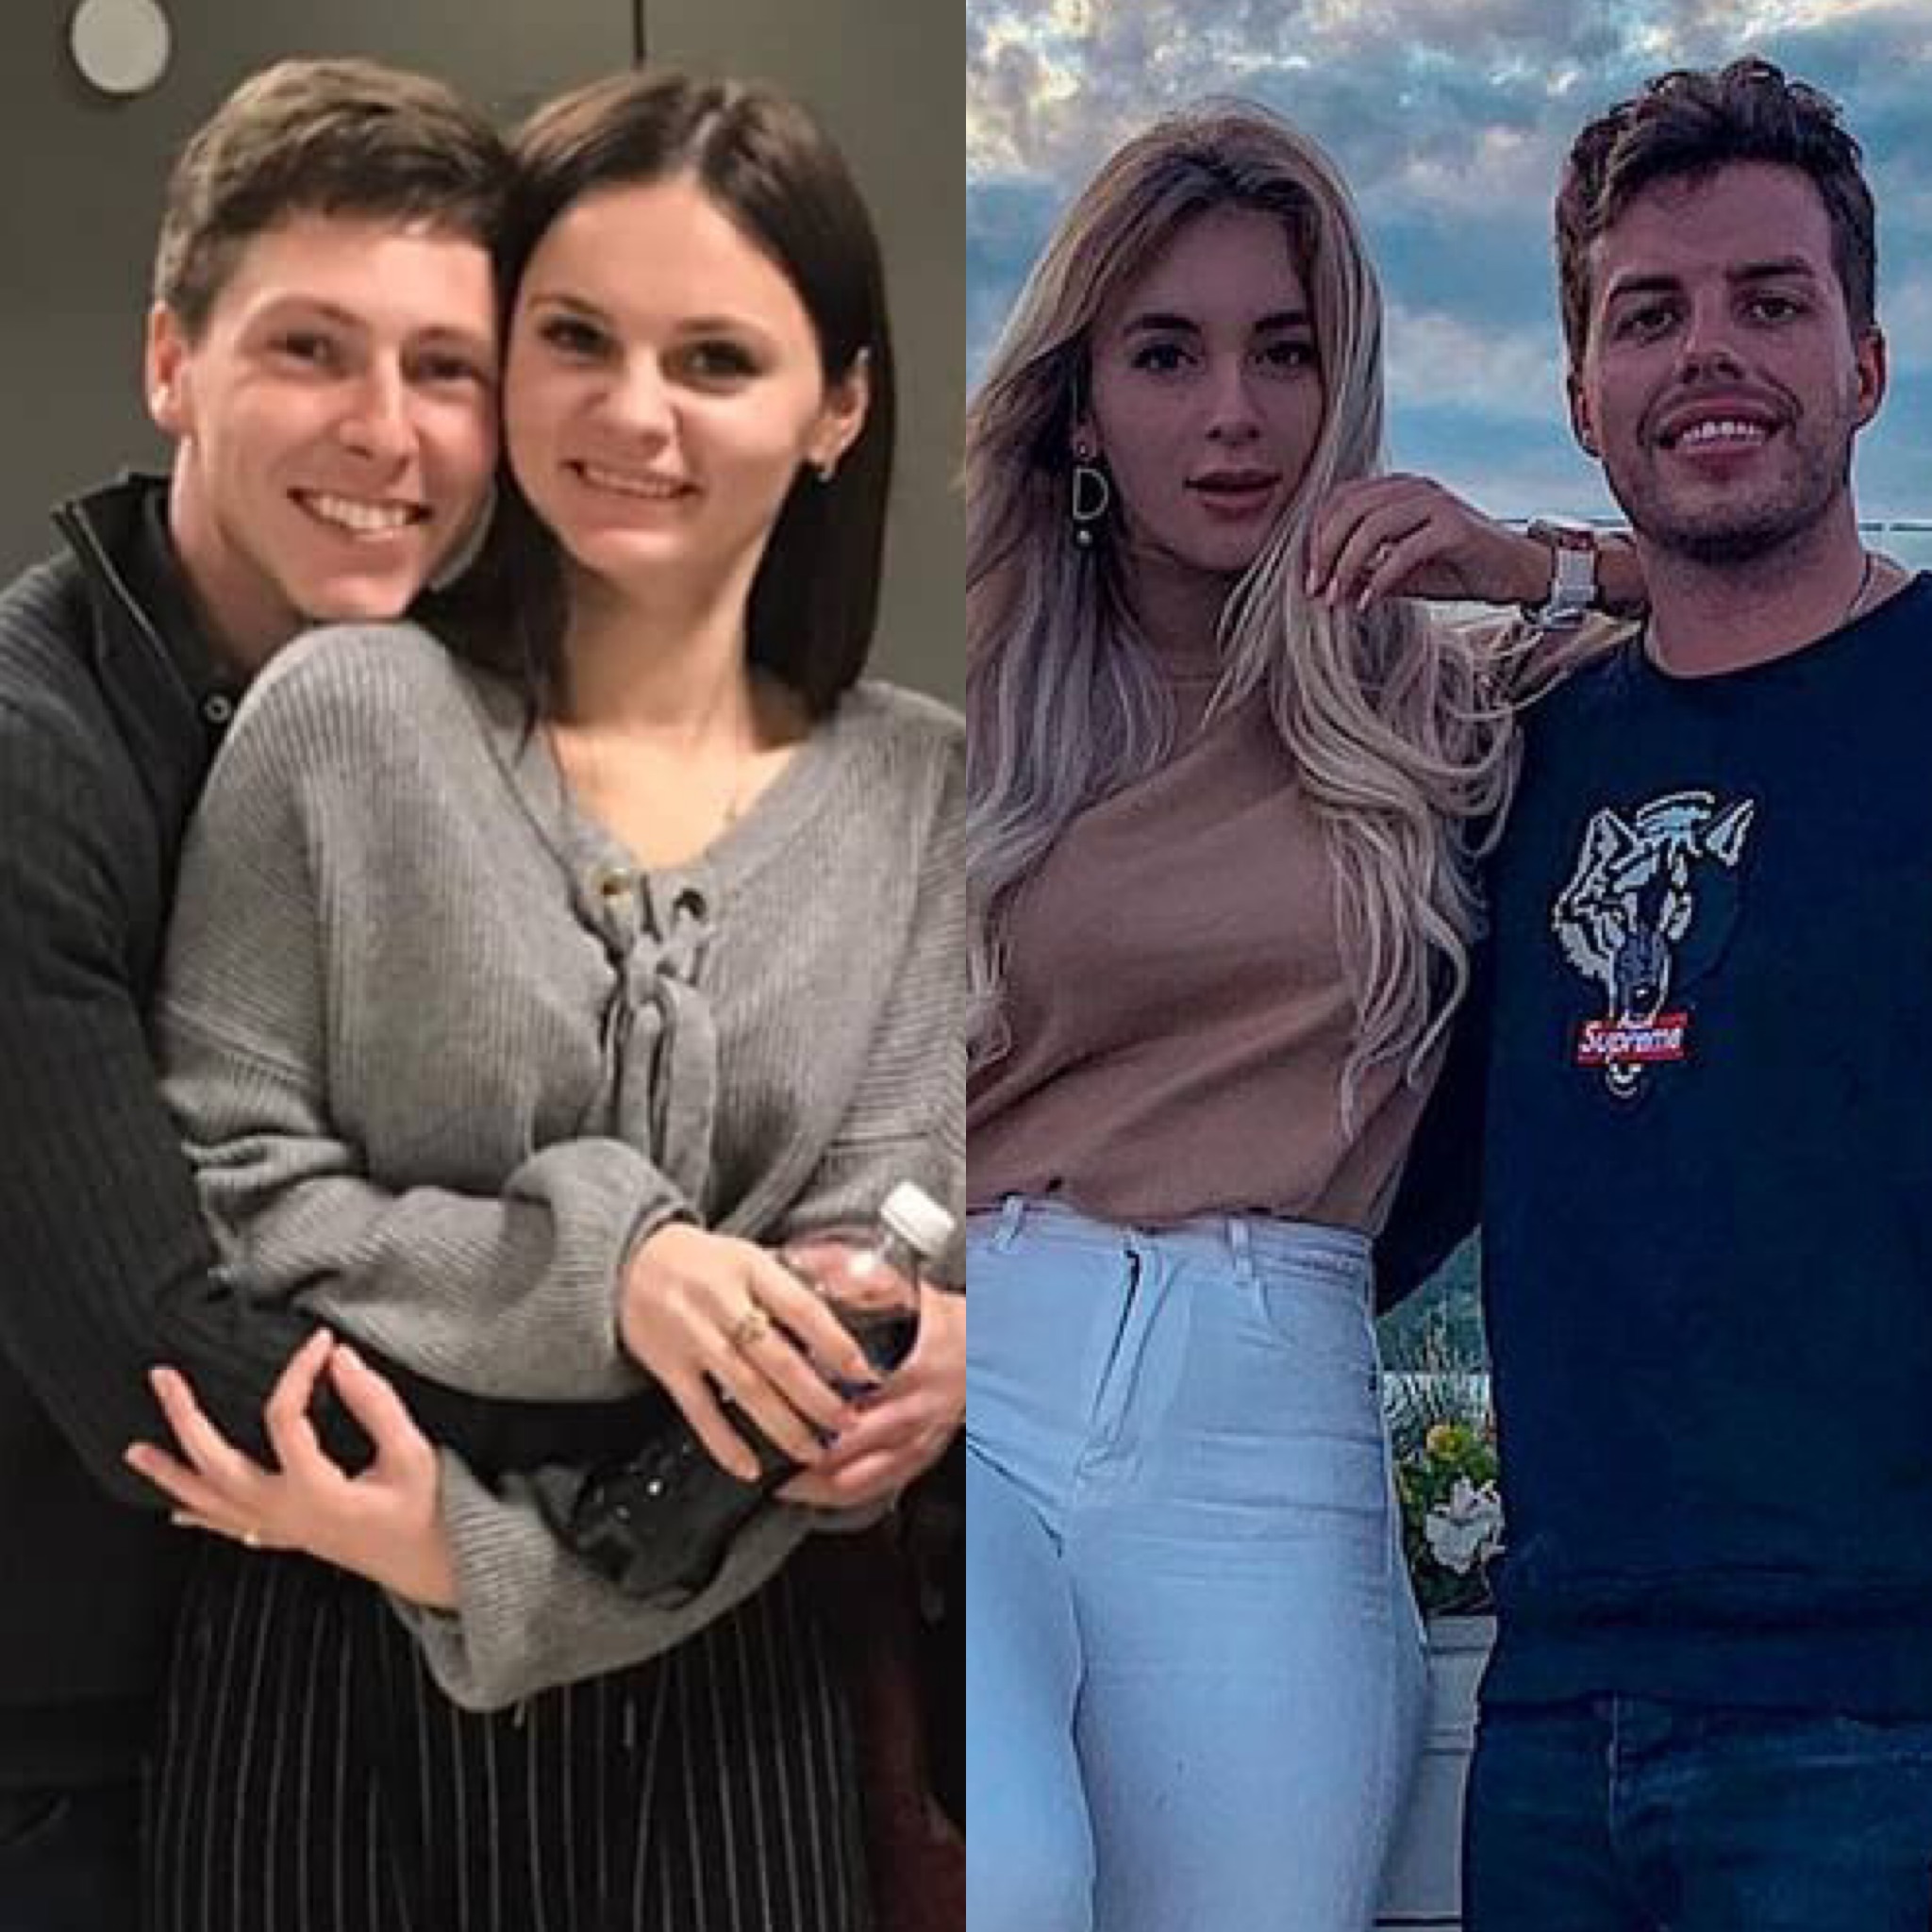 90 Day Fiance Which Season 8 Couples Are Still Together?